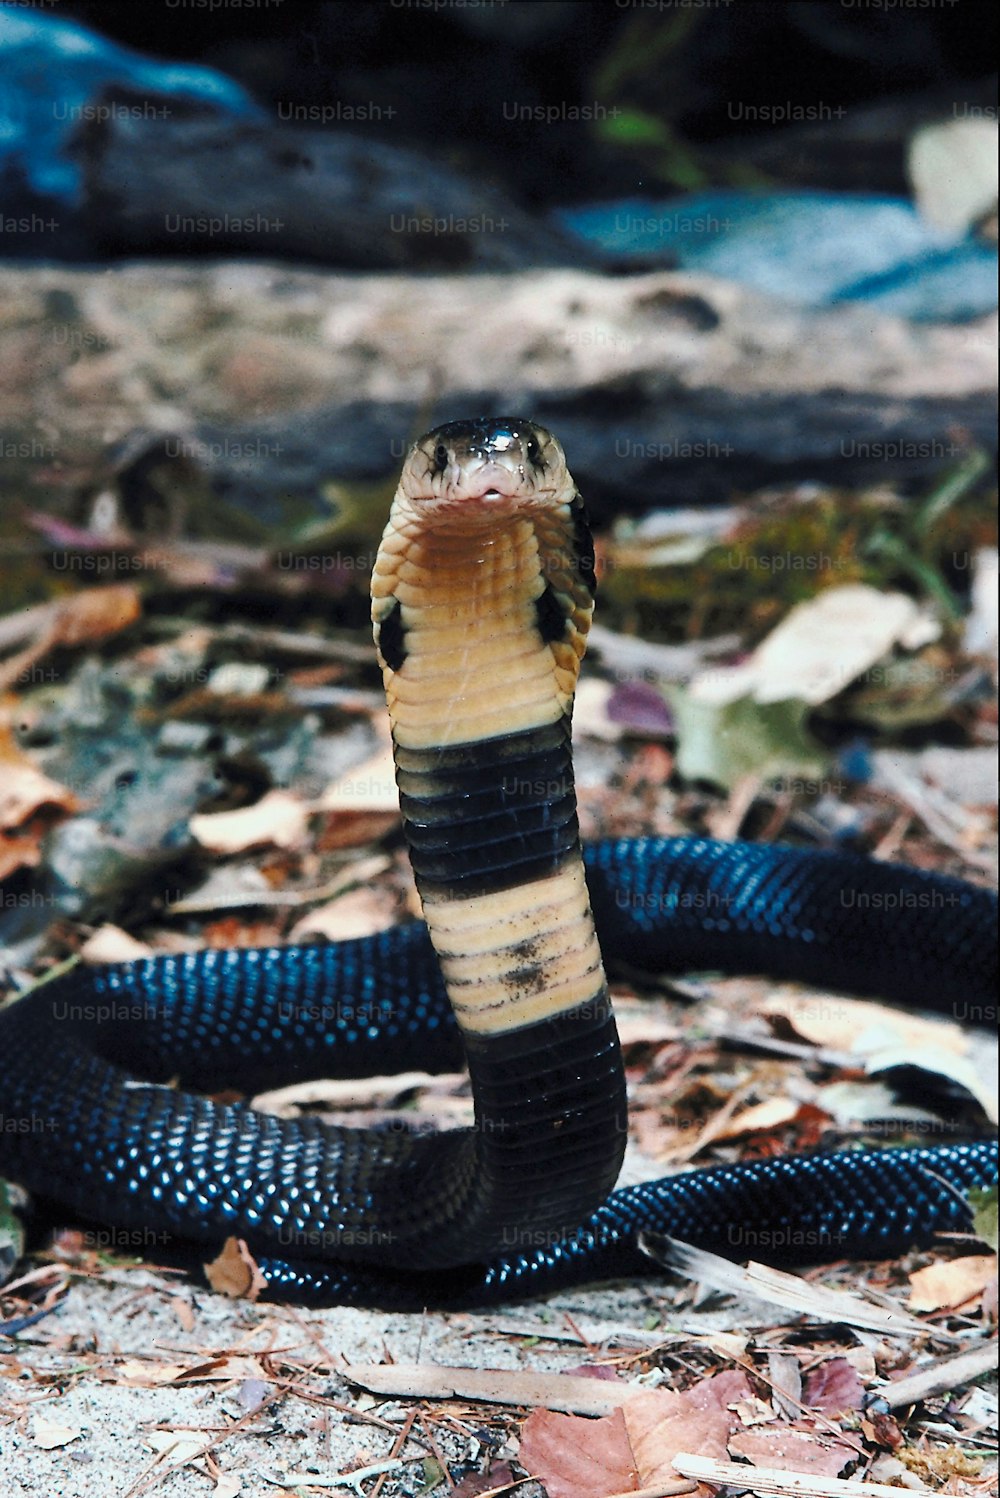 a black and brown snake on the ground